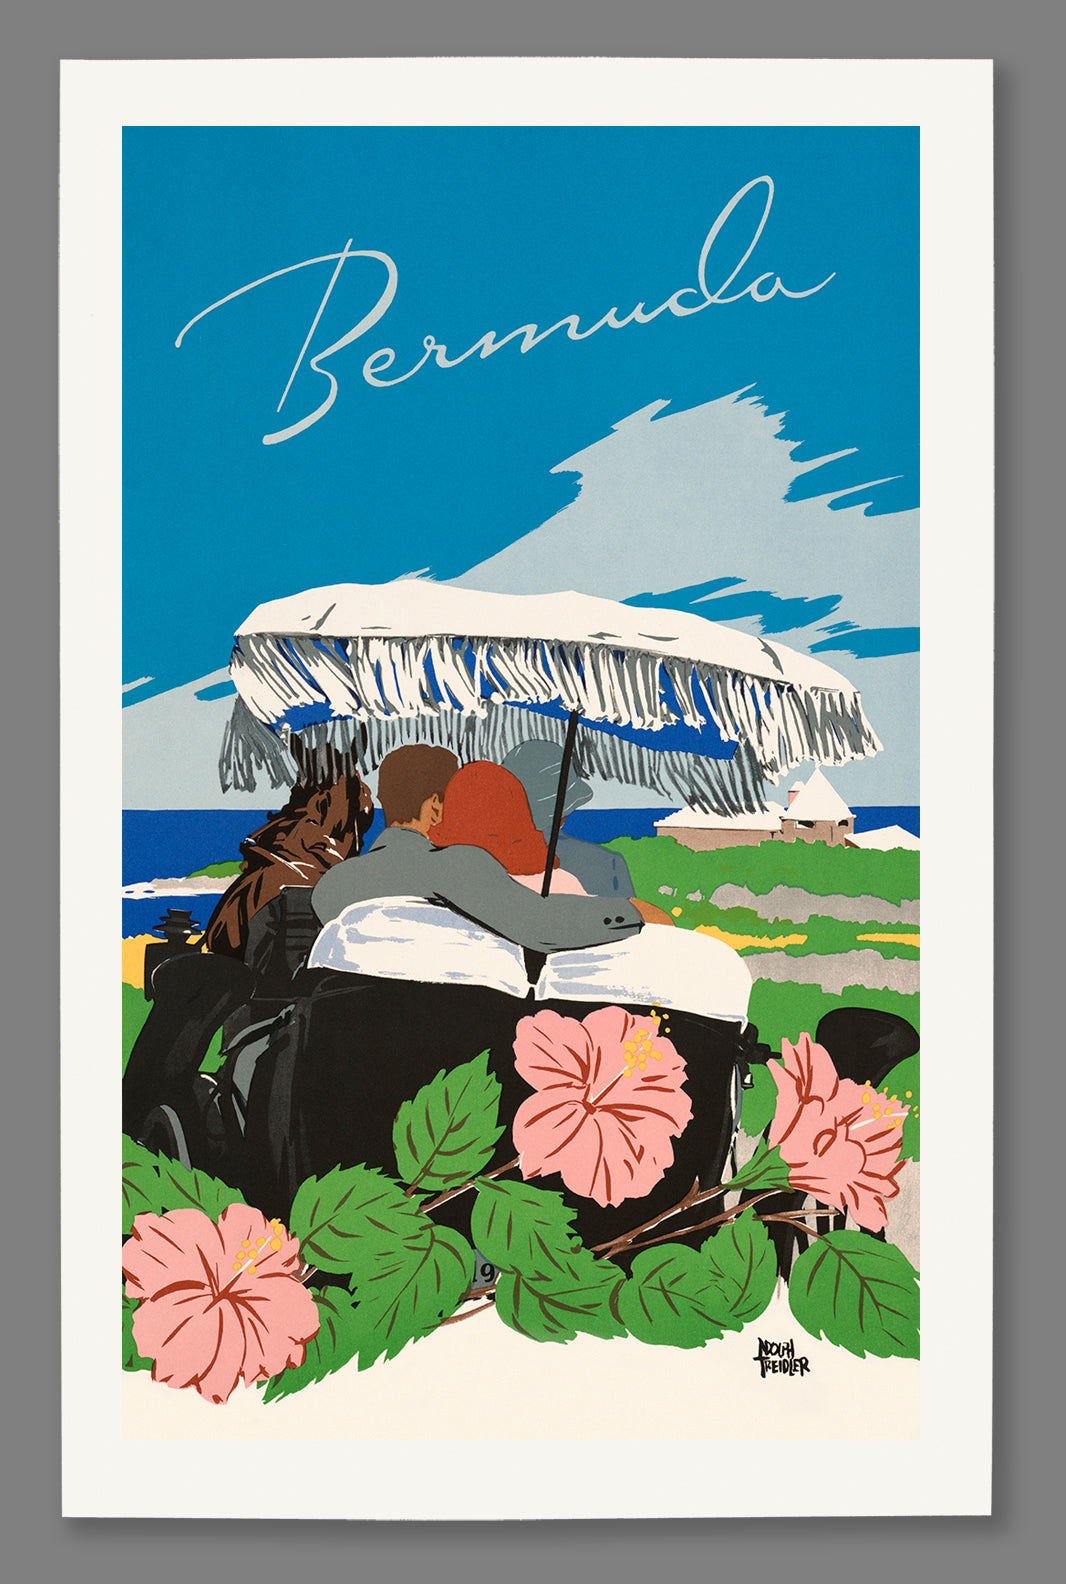 Paper print mockup of Bermuda travel poster featuring couple in a carriage